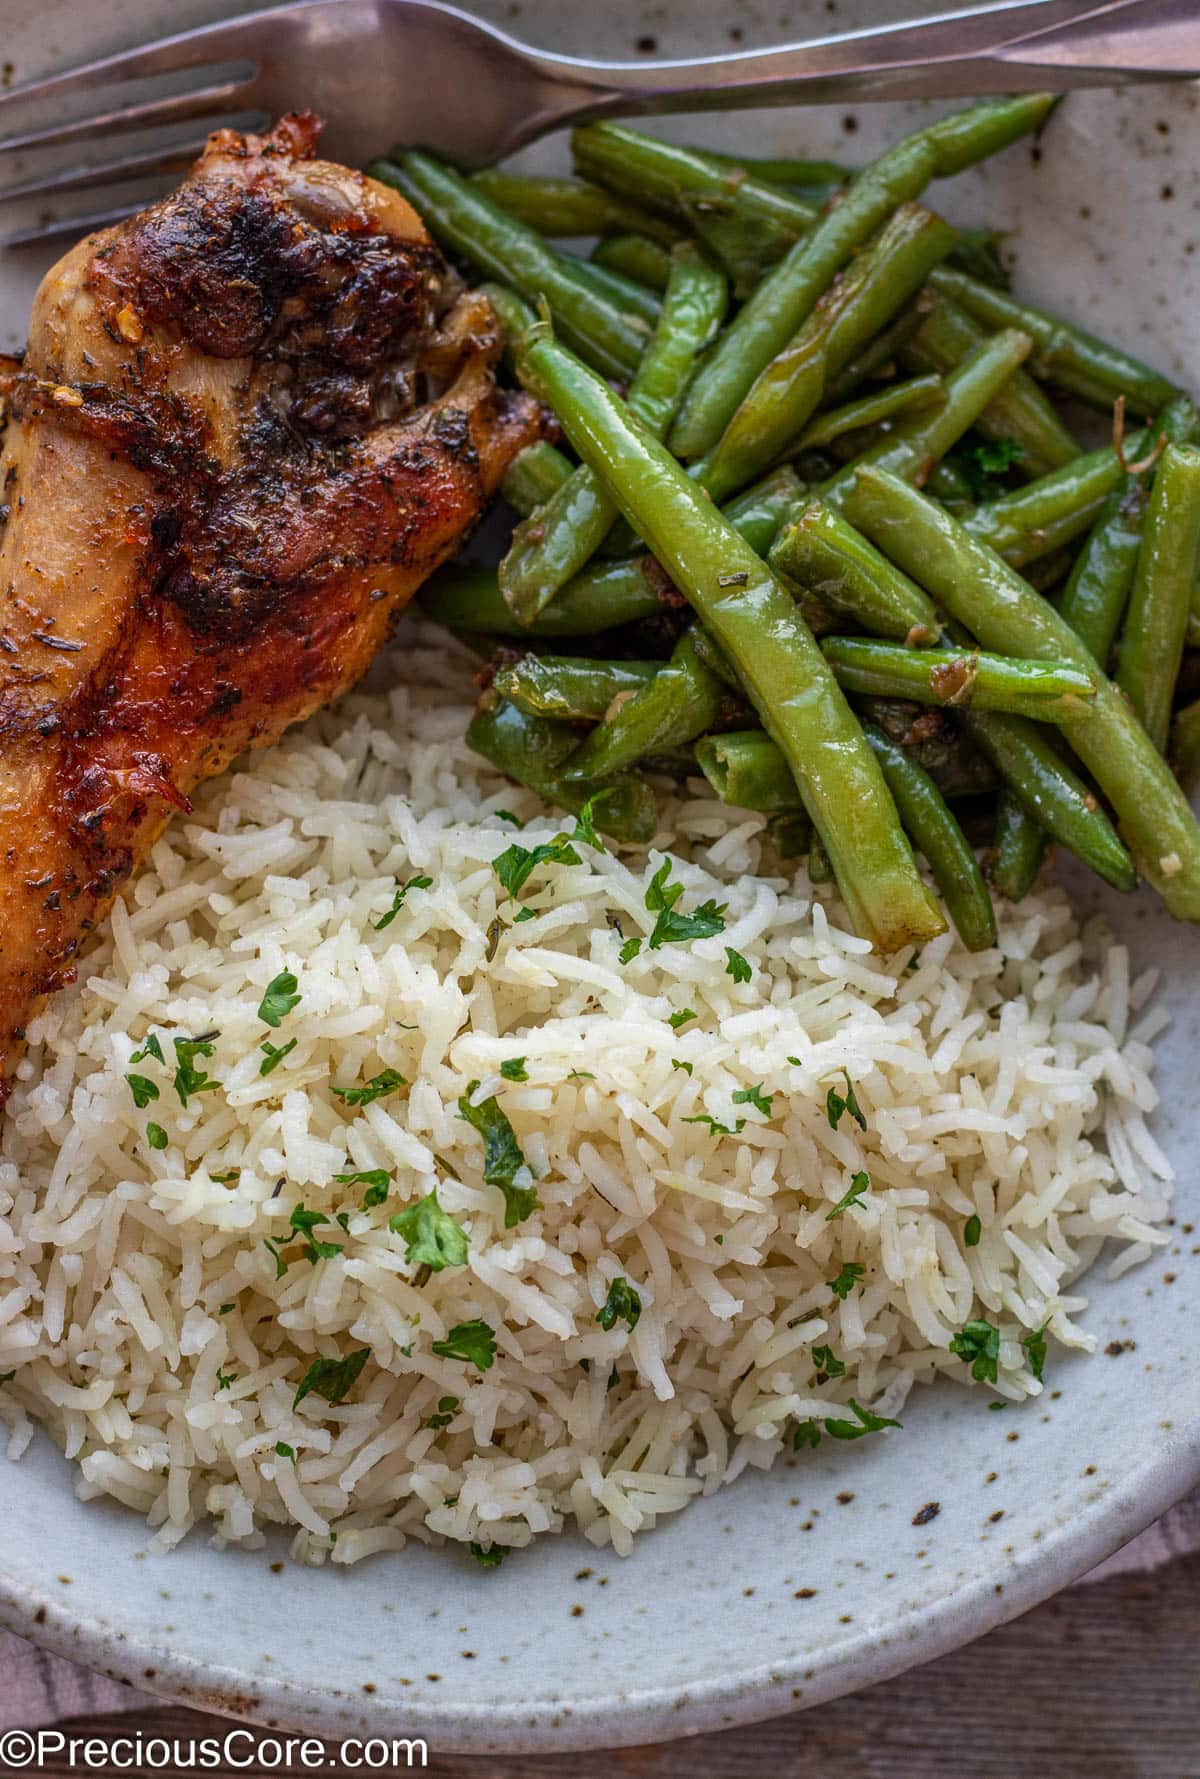 A bowl of rice, green beans and turkey.